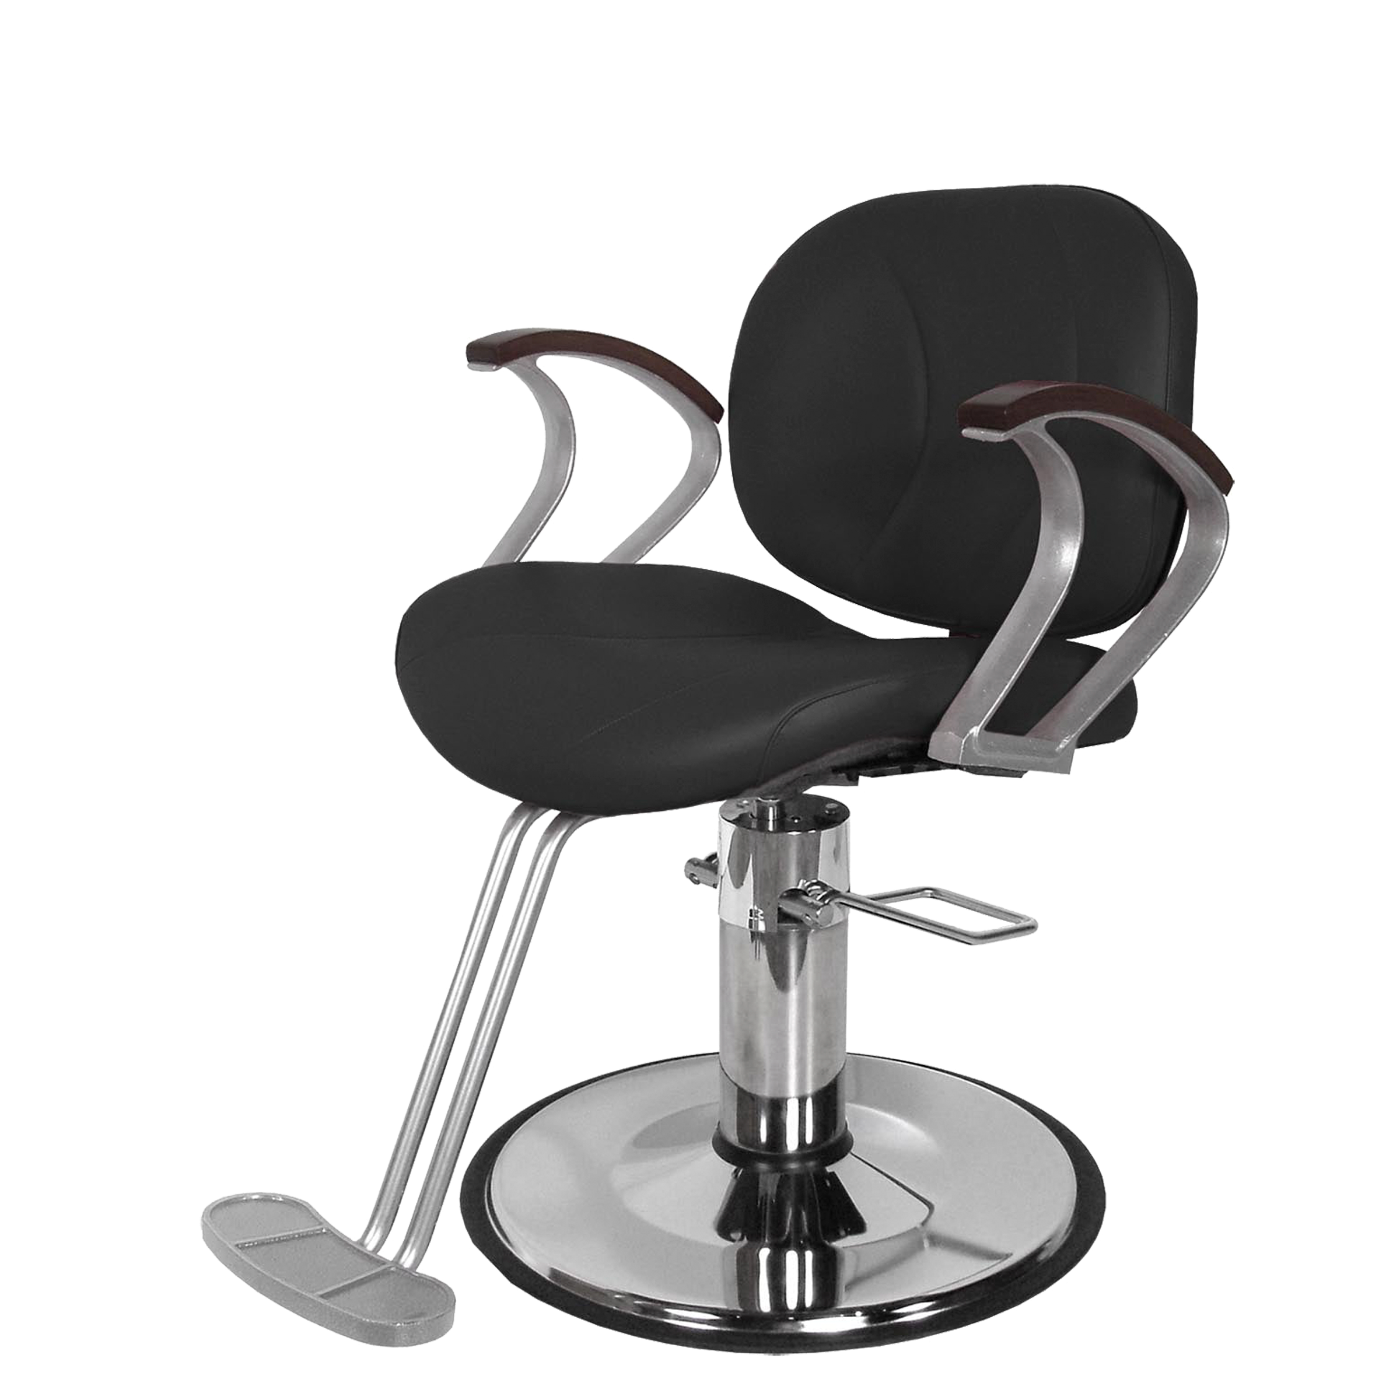 Belize Hydraulic Styling Chair